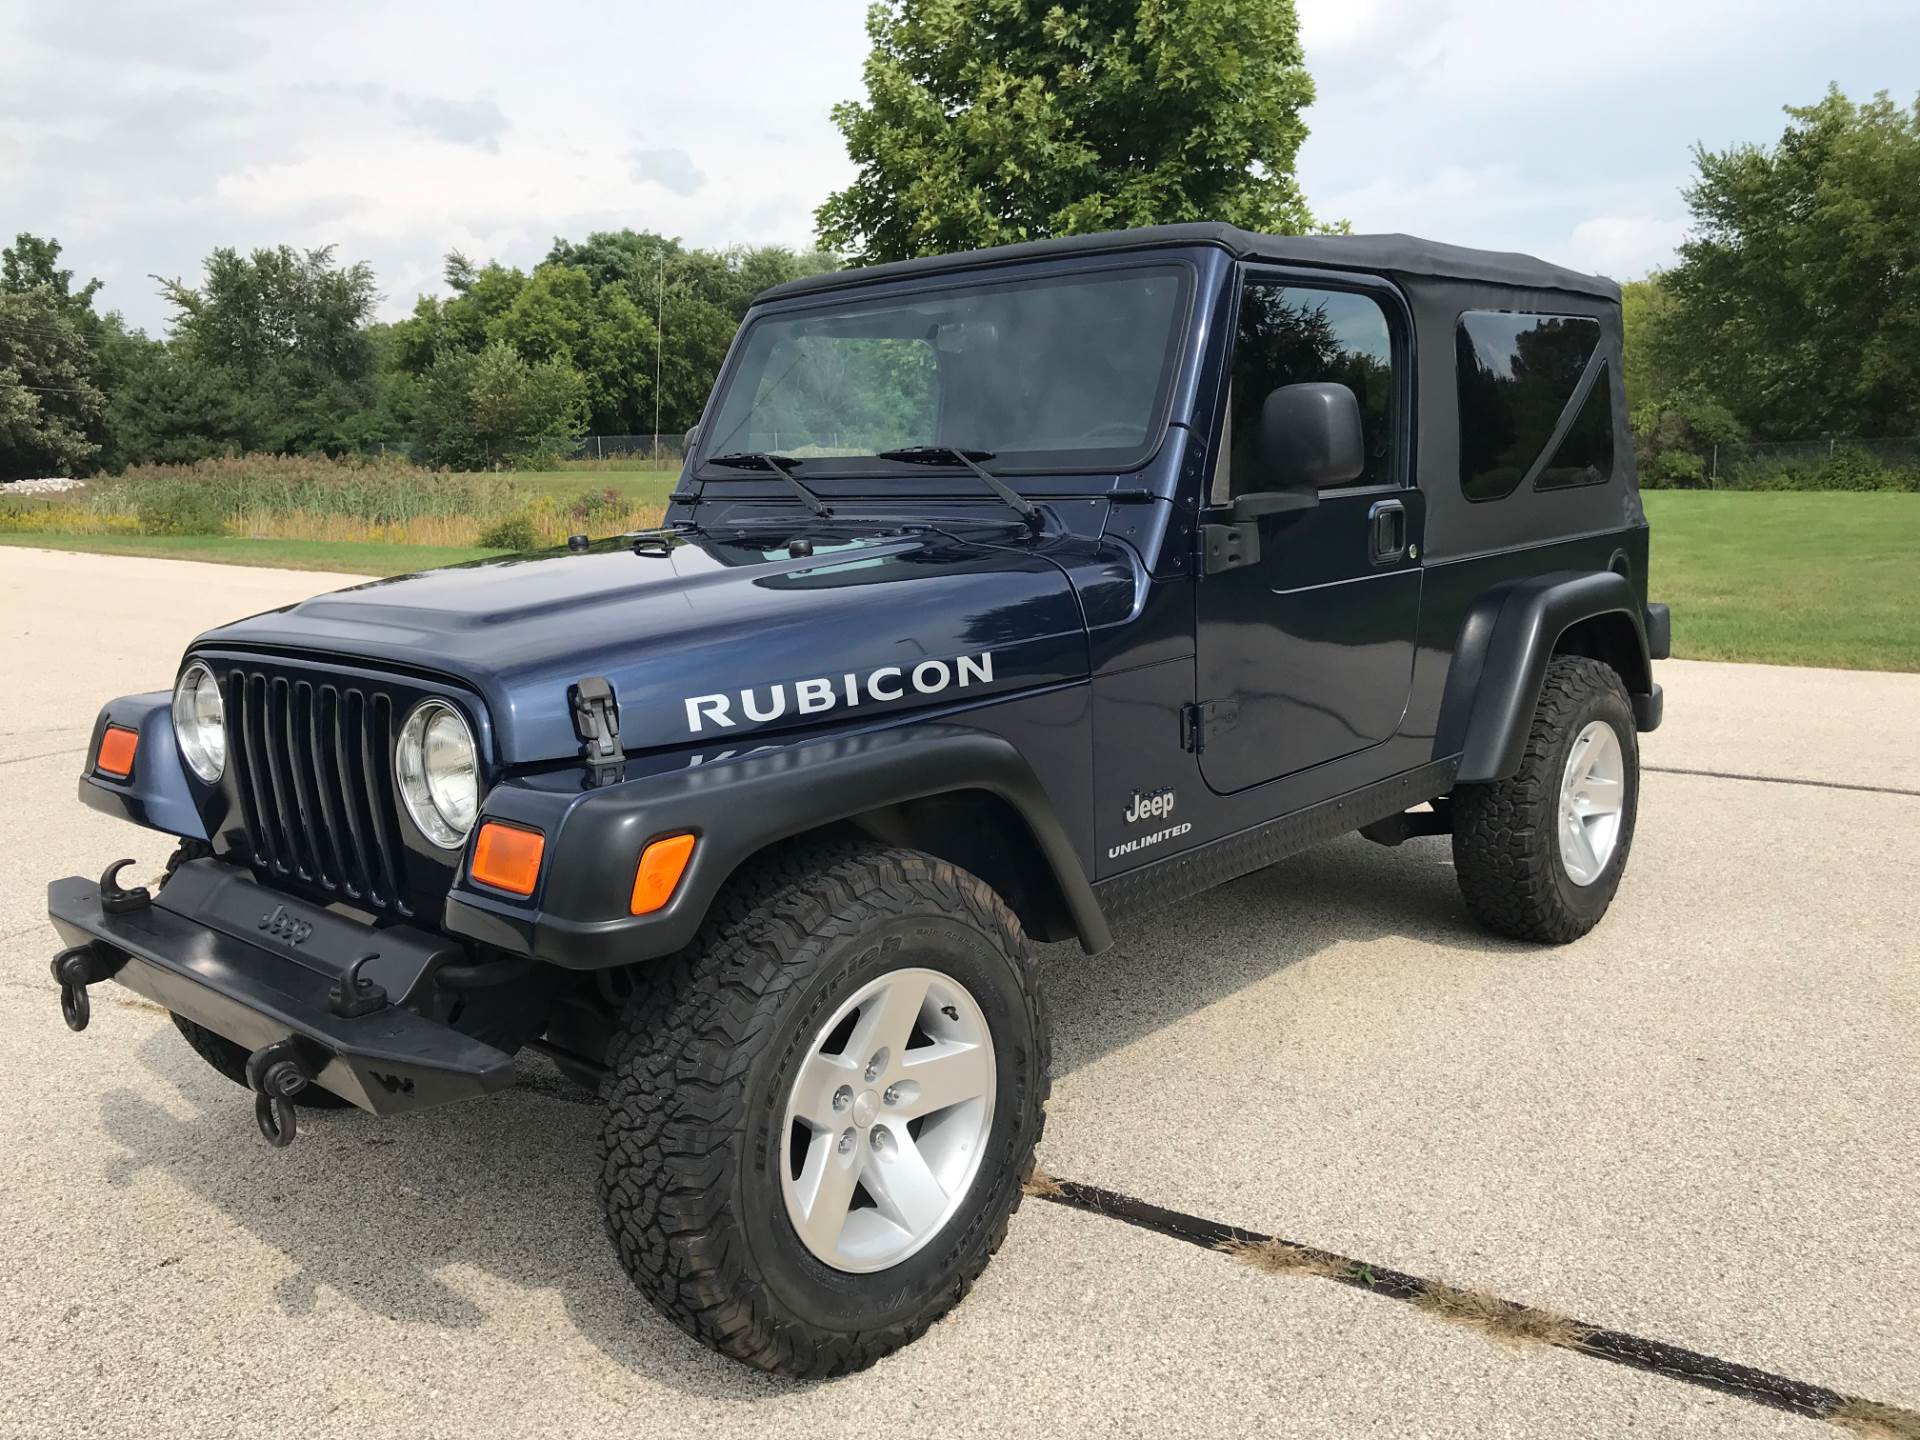 2006 Jeep Wrangler Unlimited Rubicon 2dr SUV 4WD in Big Bend, Wisconsin - Photo 93